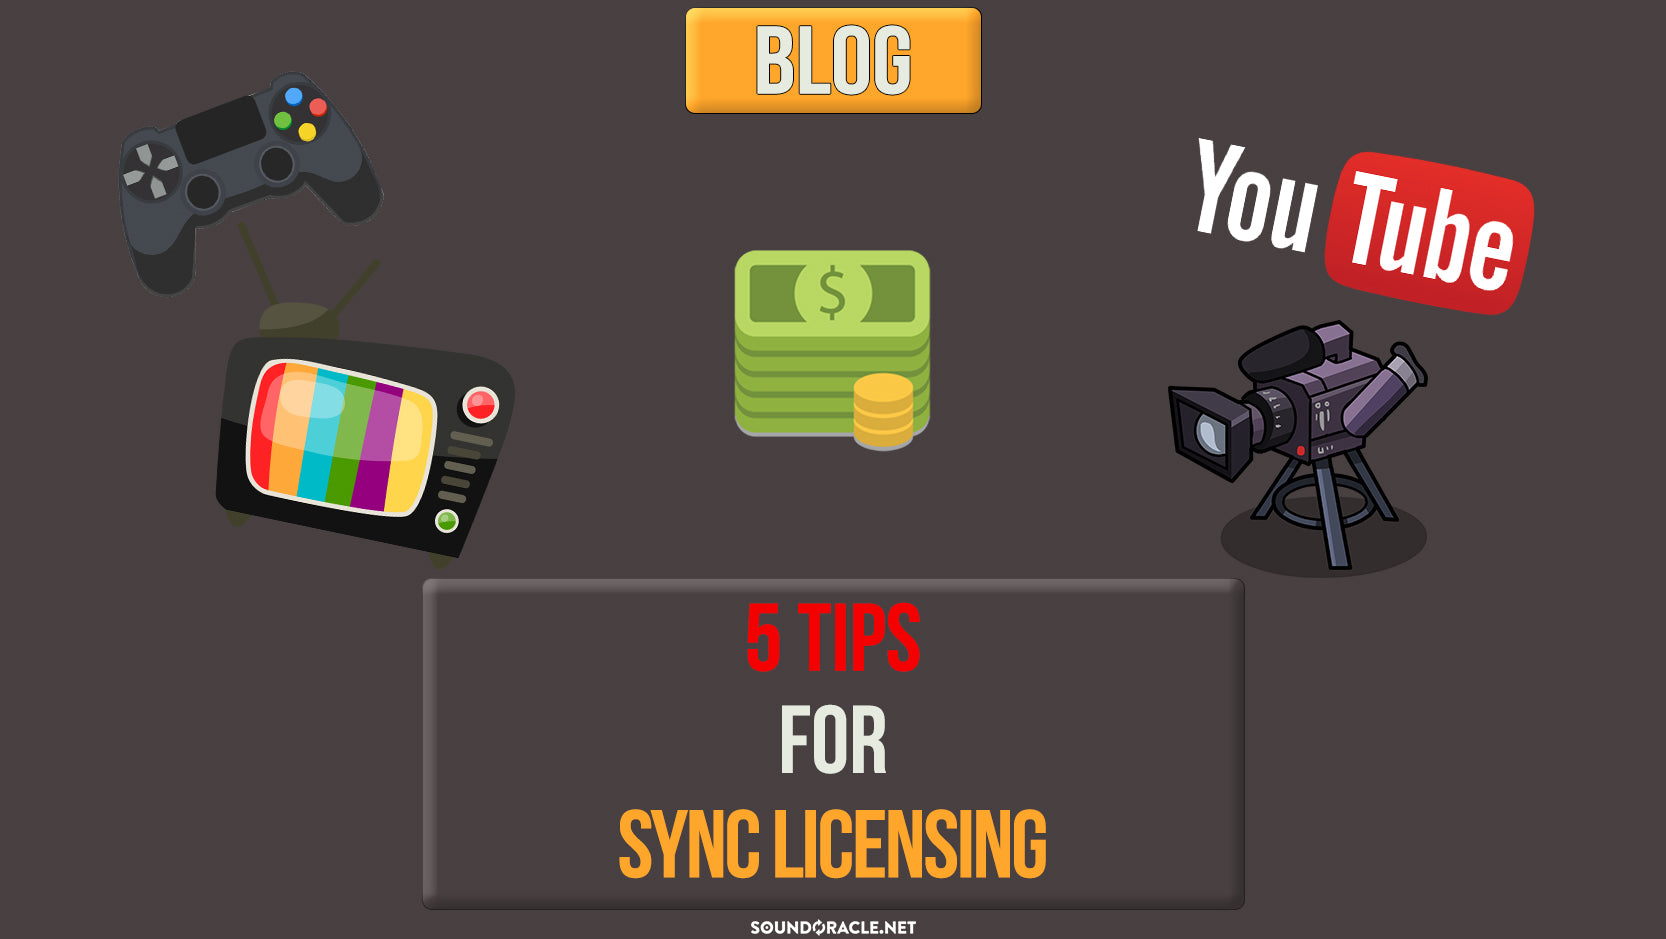 5 Tips For Sync Licensing